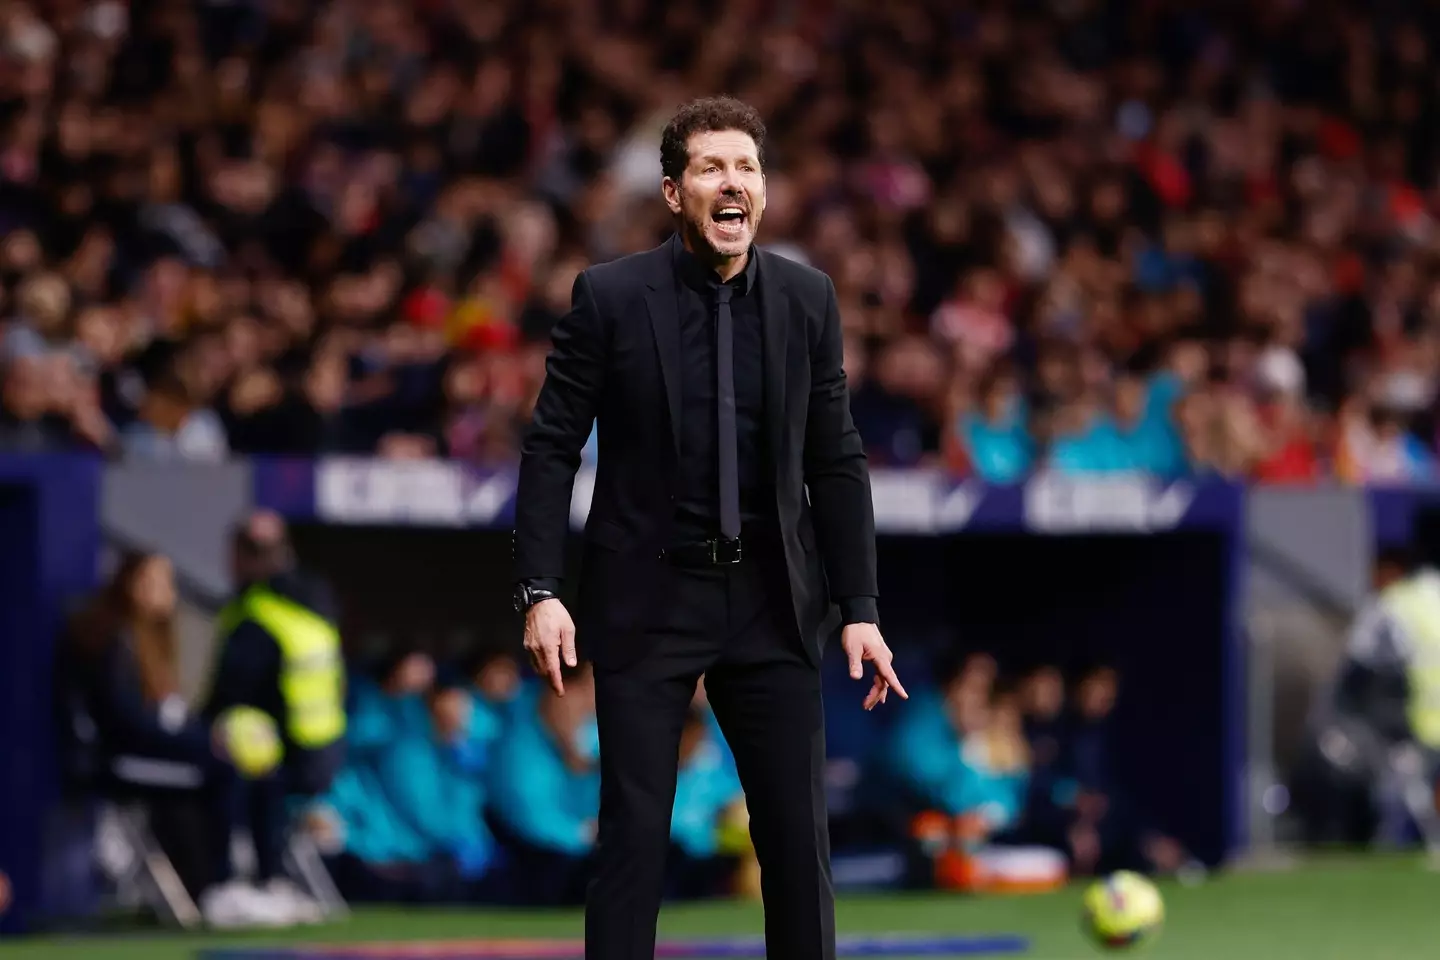 Atletico Madrid manager Diego Simeone has been backed to manage in the Premier League.